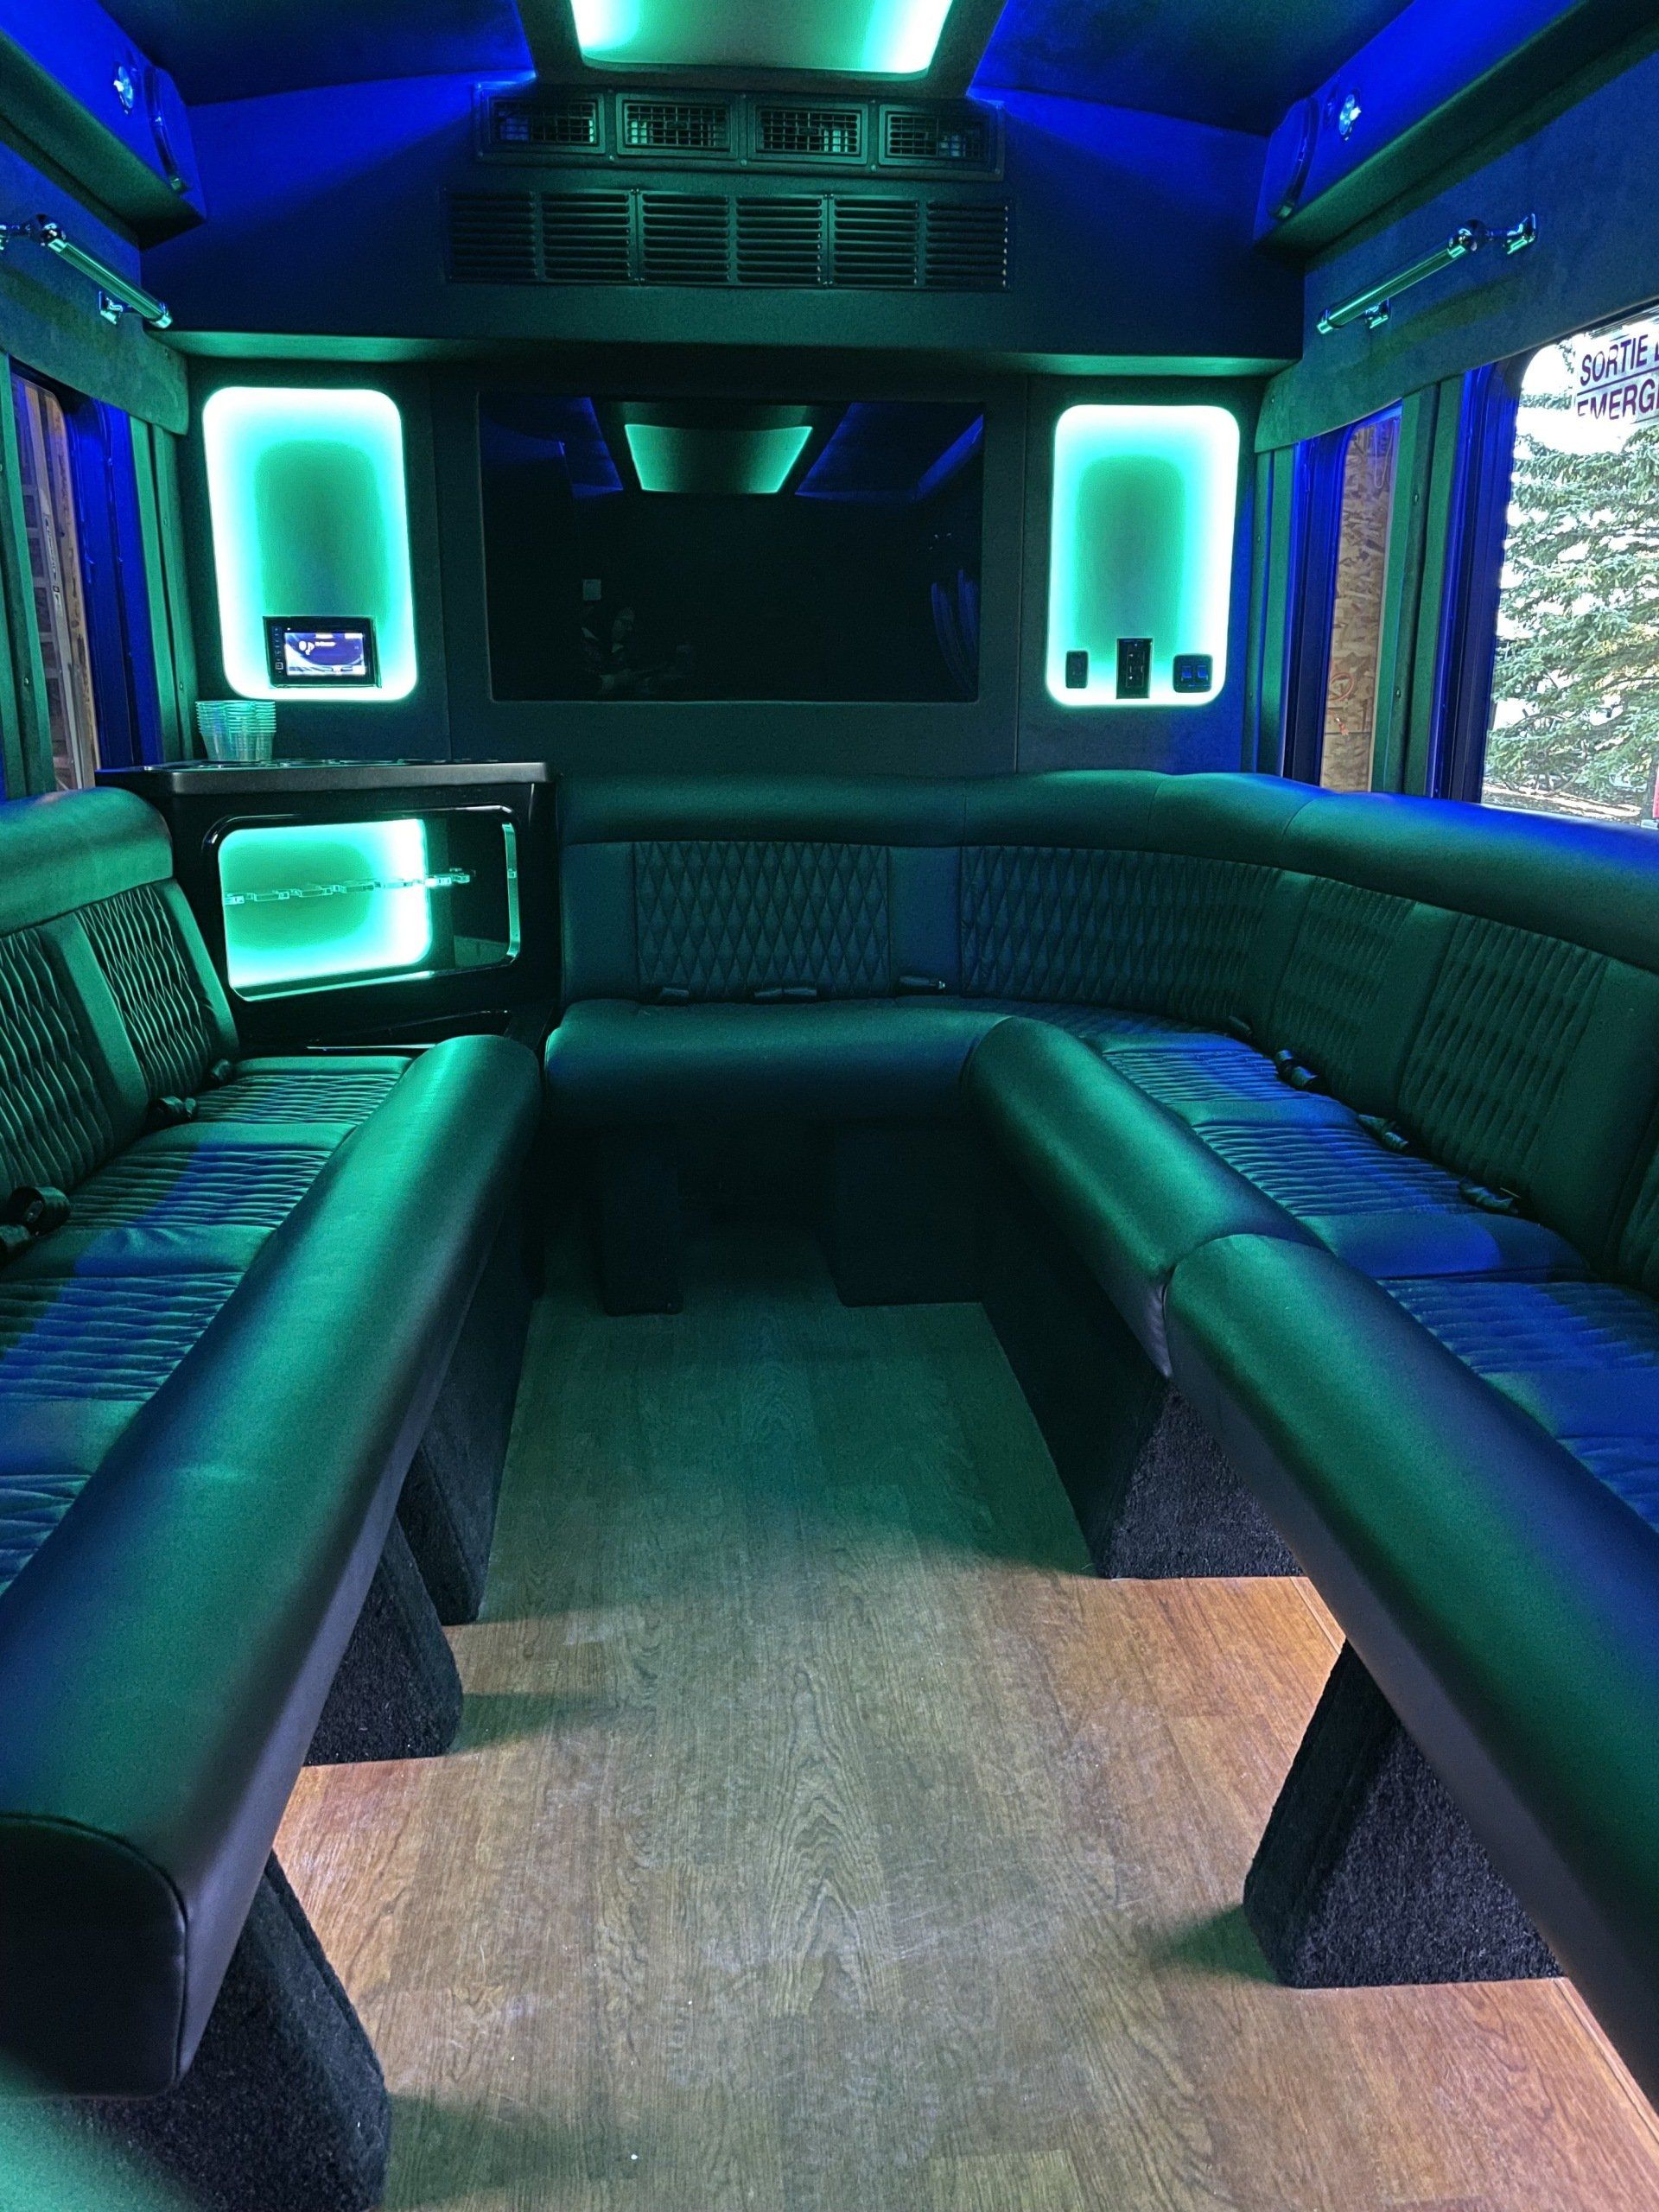 the inside of 2019 Battisti party bus with green LED lights on the walls